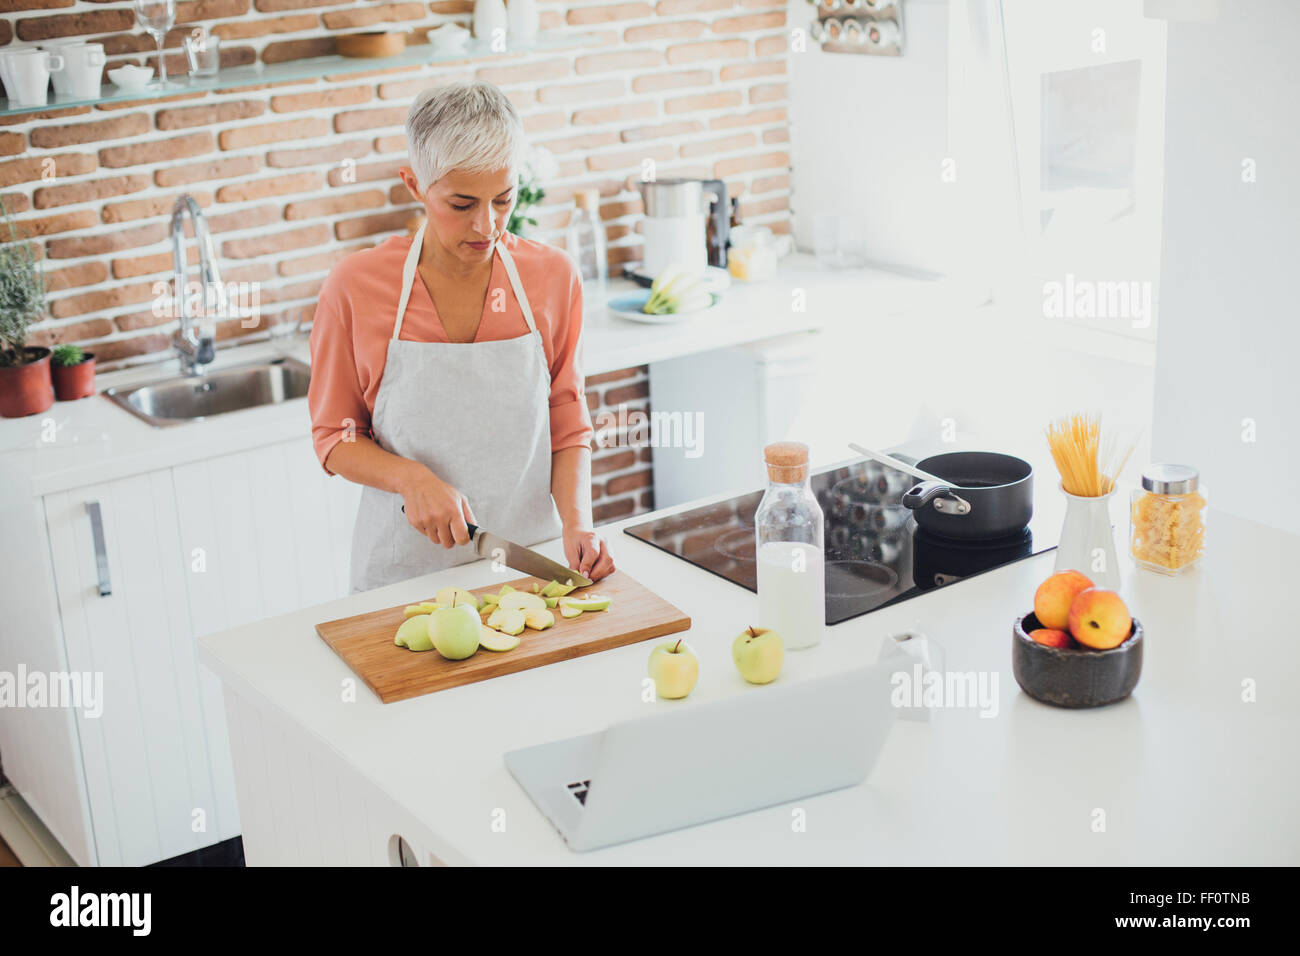 Older Caucasian woman cutting apples in kitchen Stock Photo